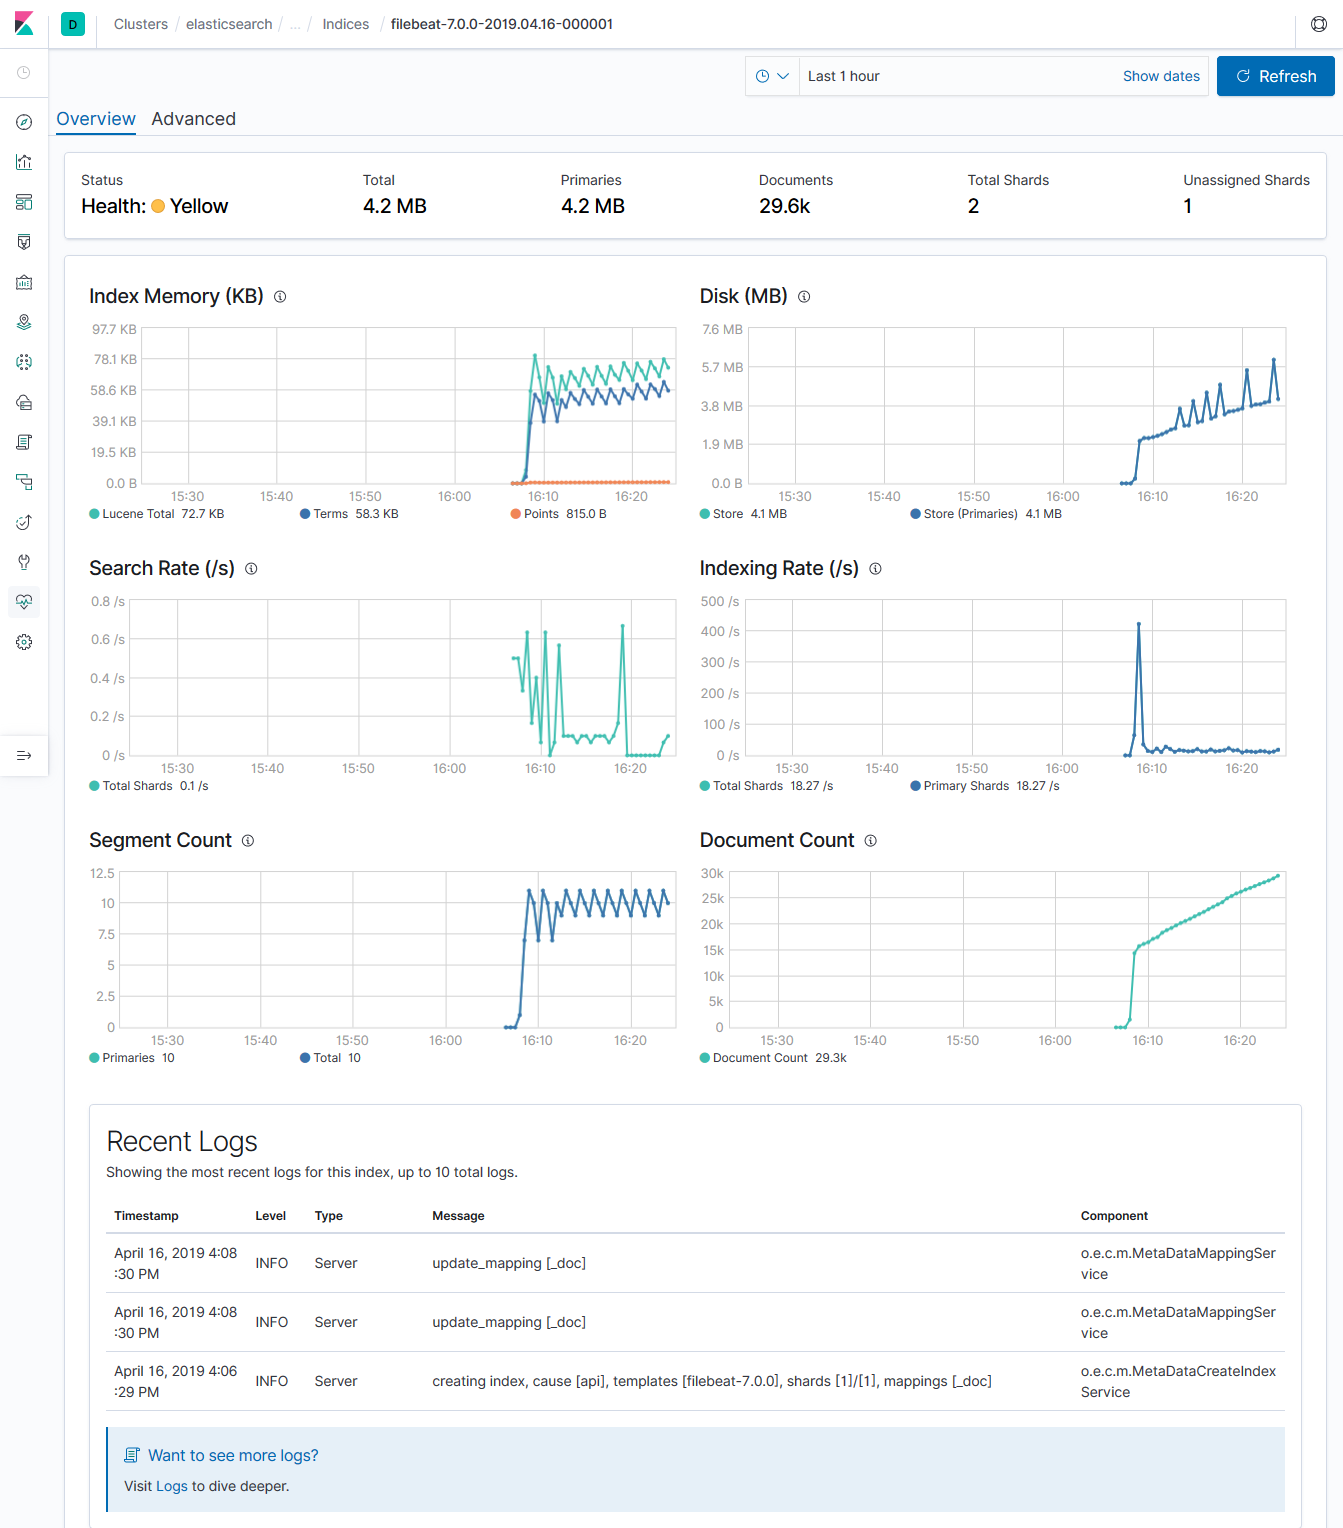 Screenshot_2019-04-16 Stack Monitoring - Elasticsearch - Indices - filebeat-7 0 0-2019 04 16-000001 - Overview.png